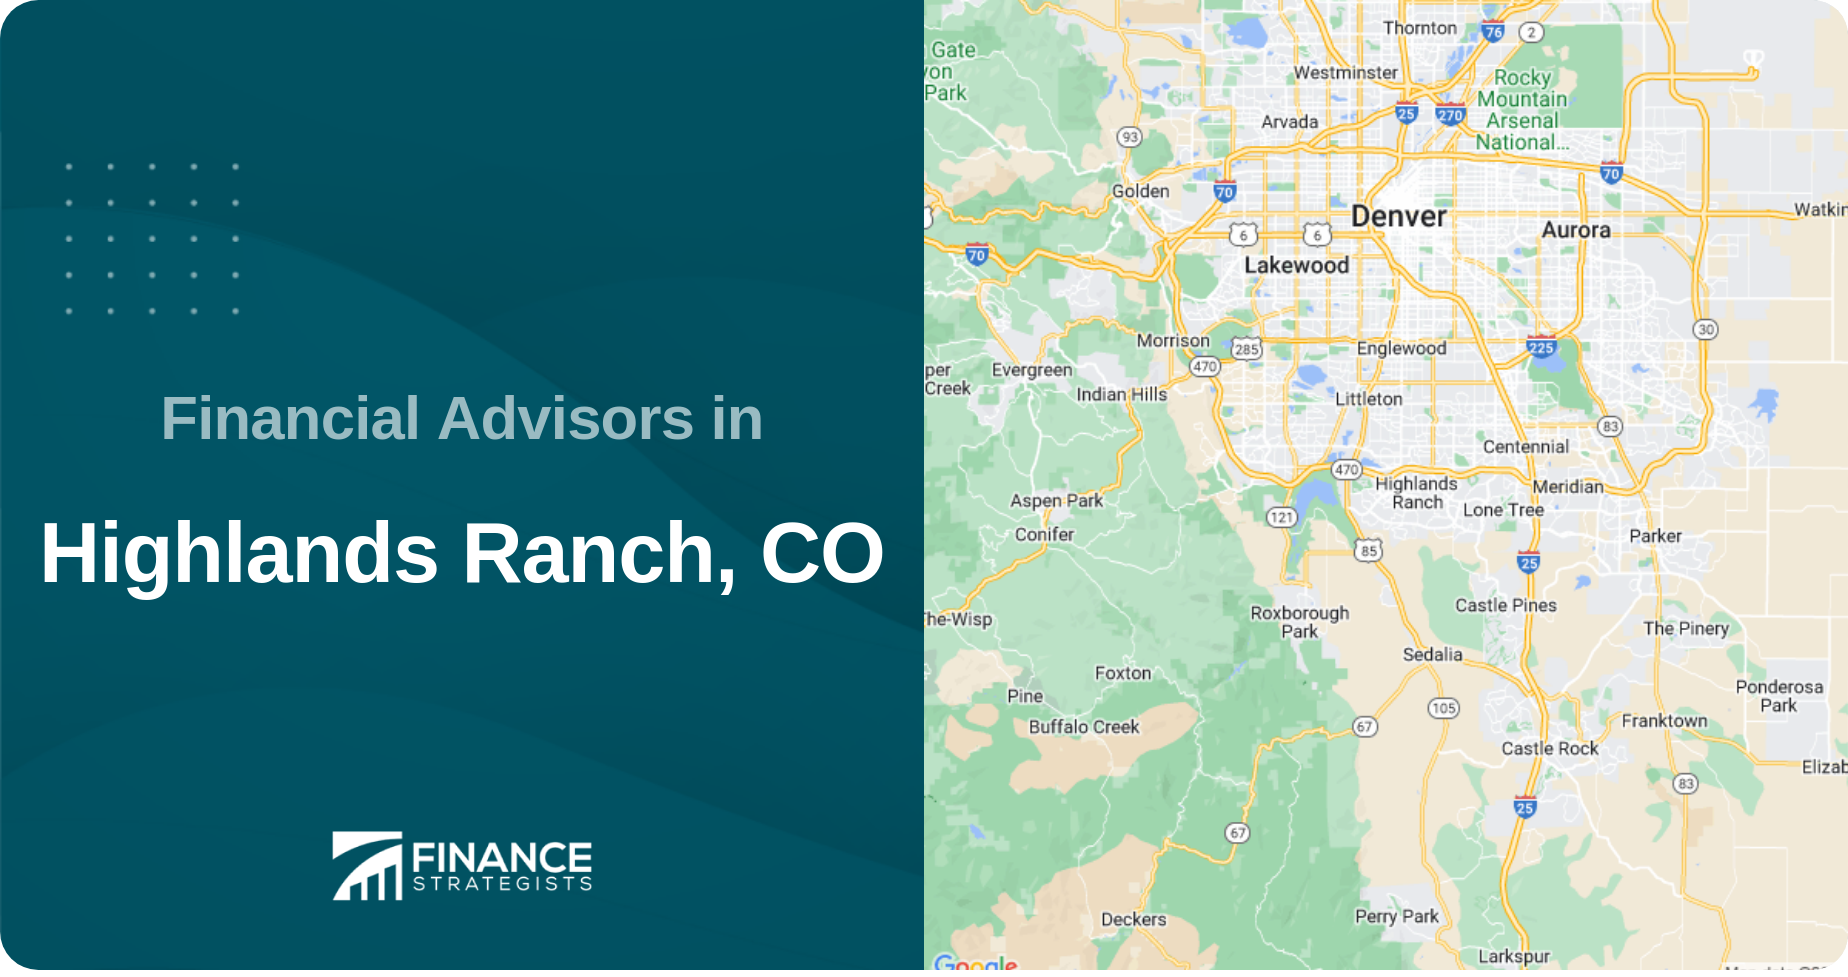 Financial Advisors in Highlands Ranch, CO